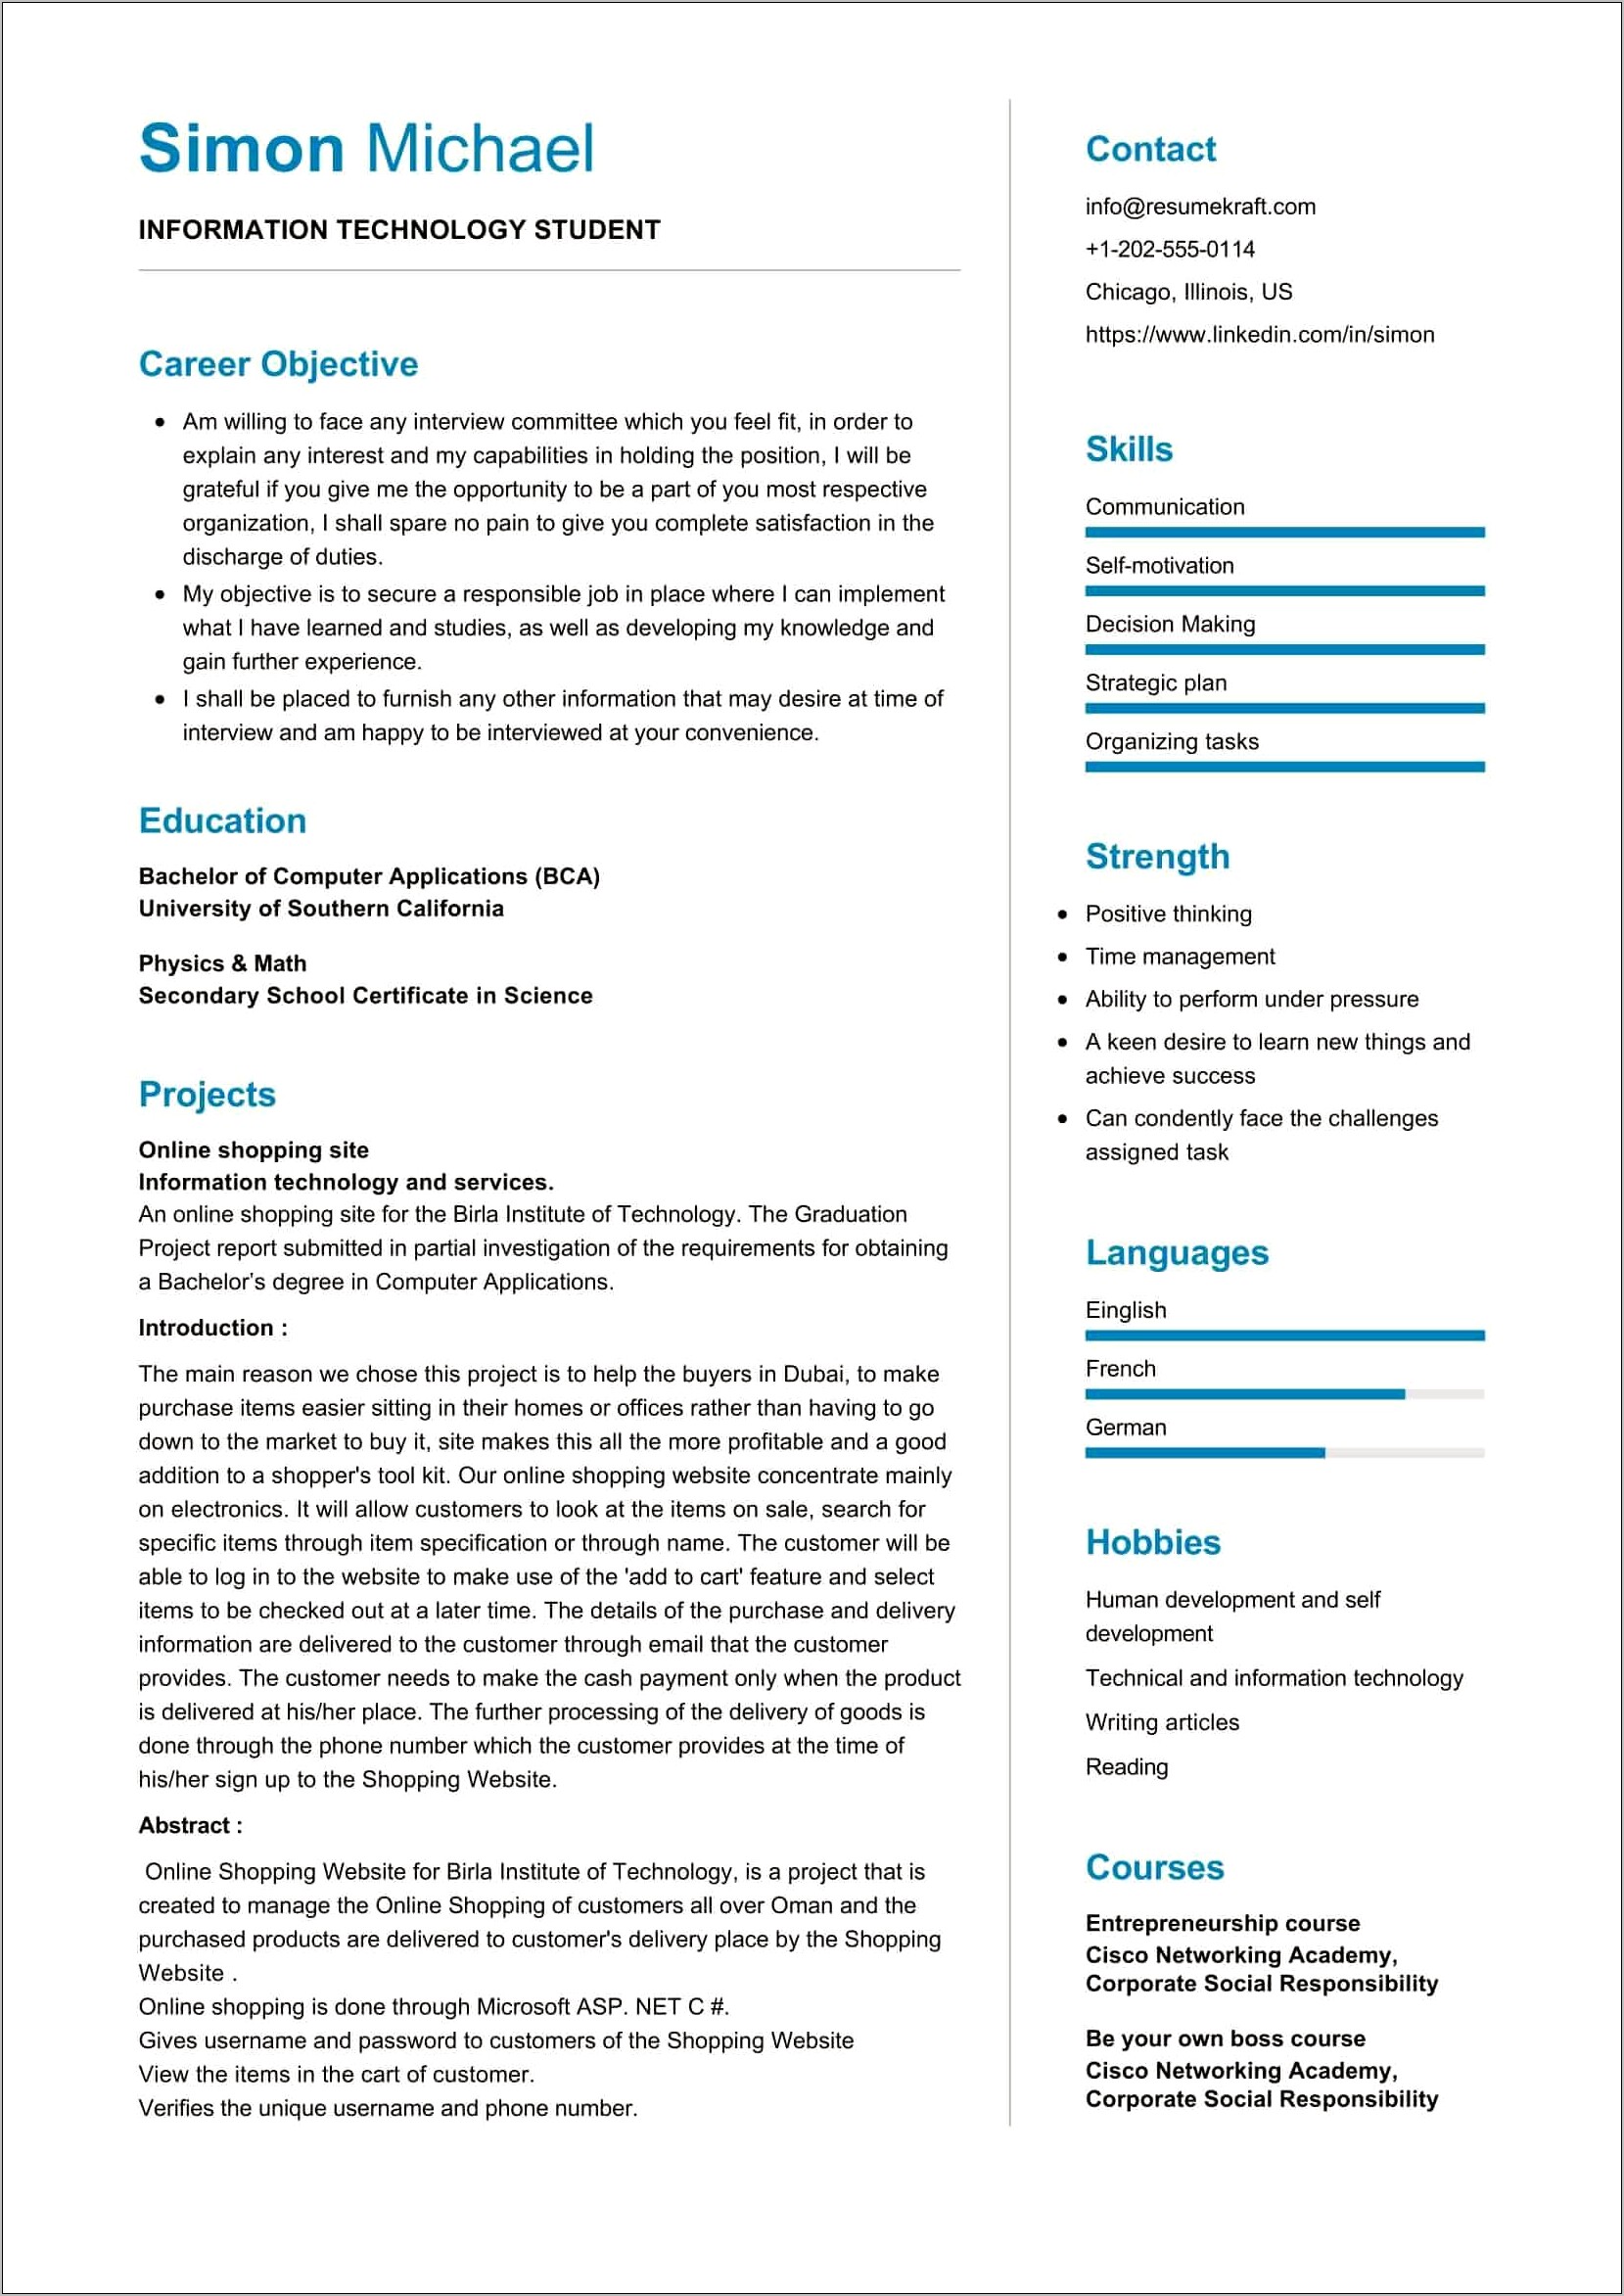 Marketing Student Resume Objective Examples